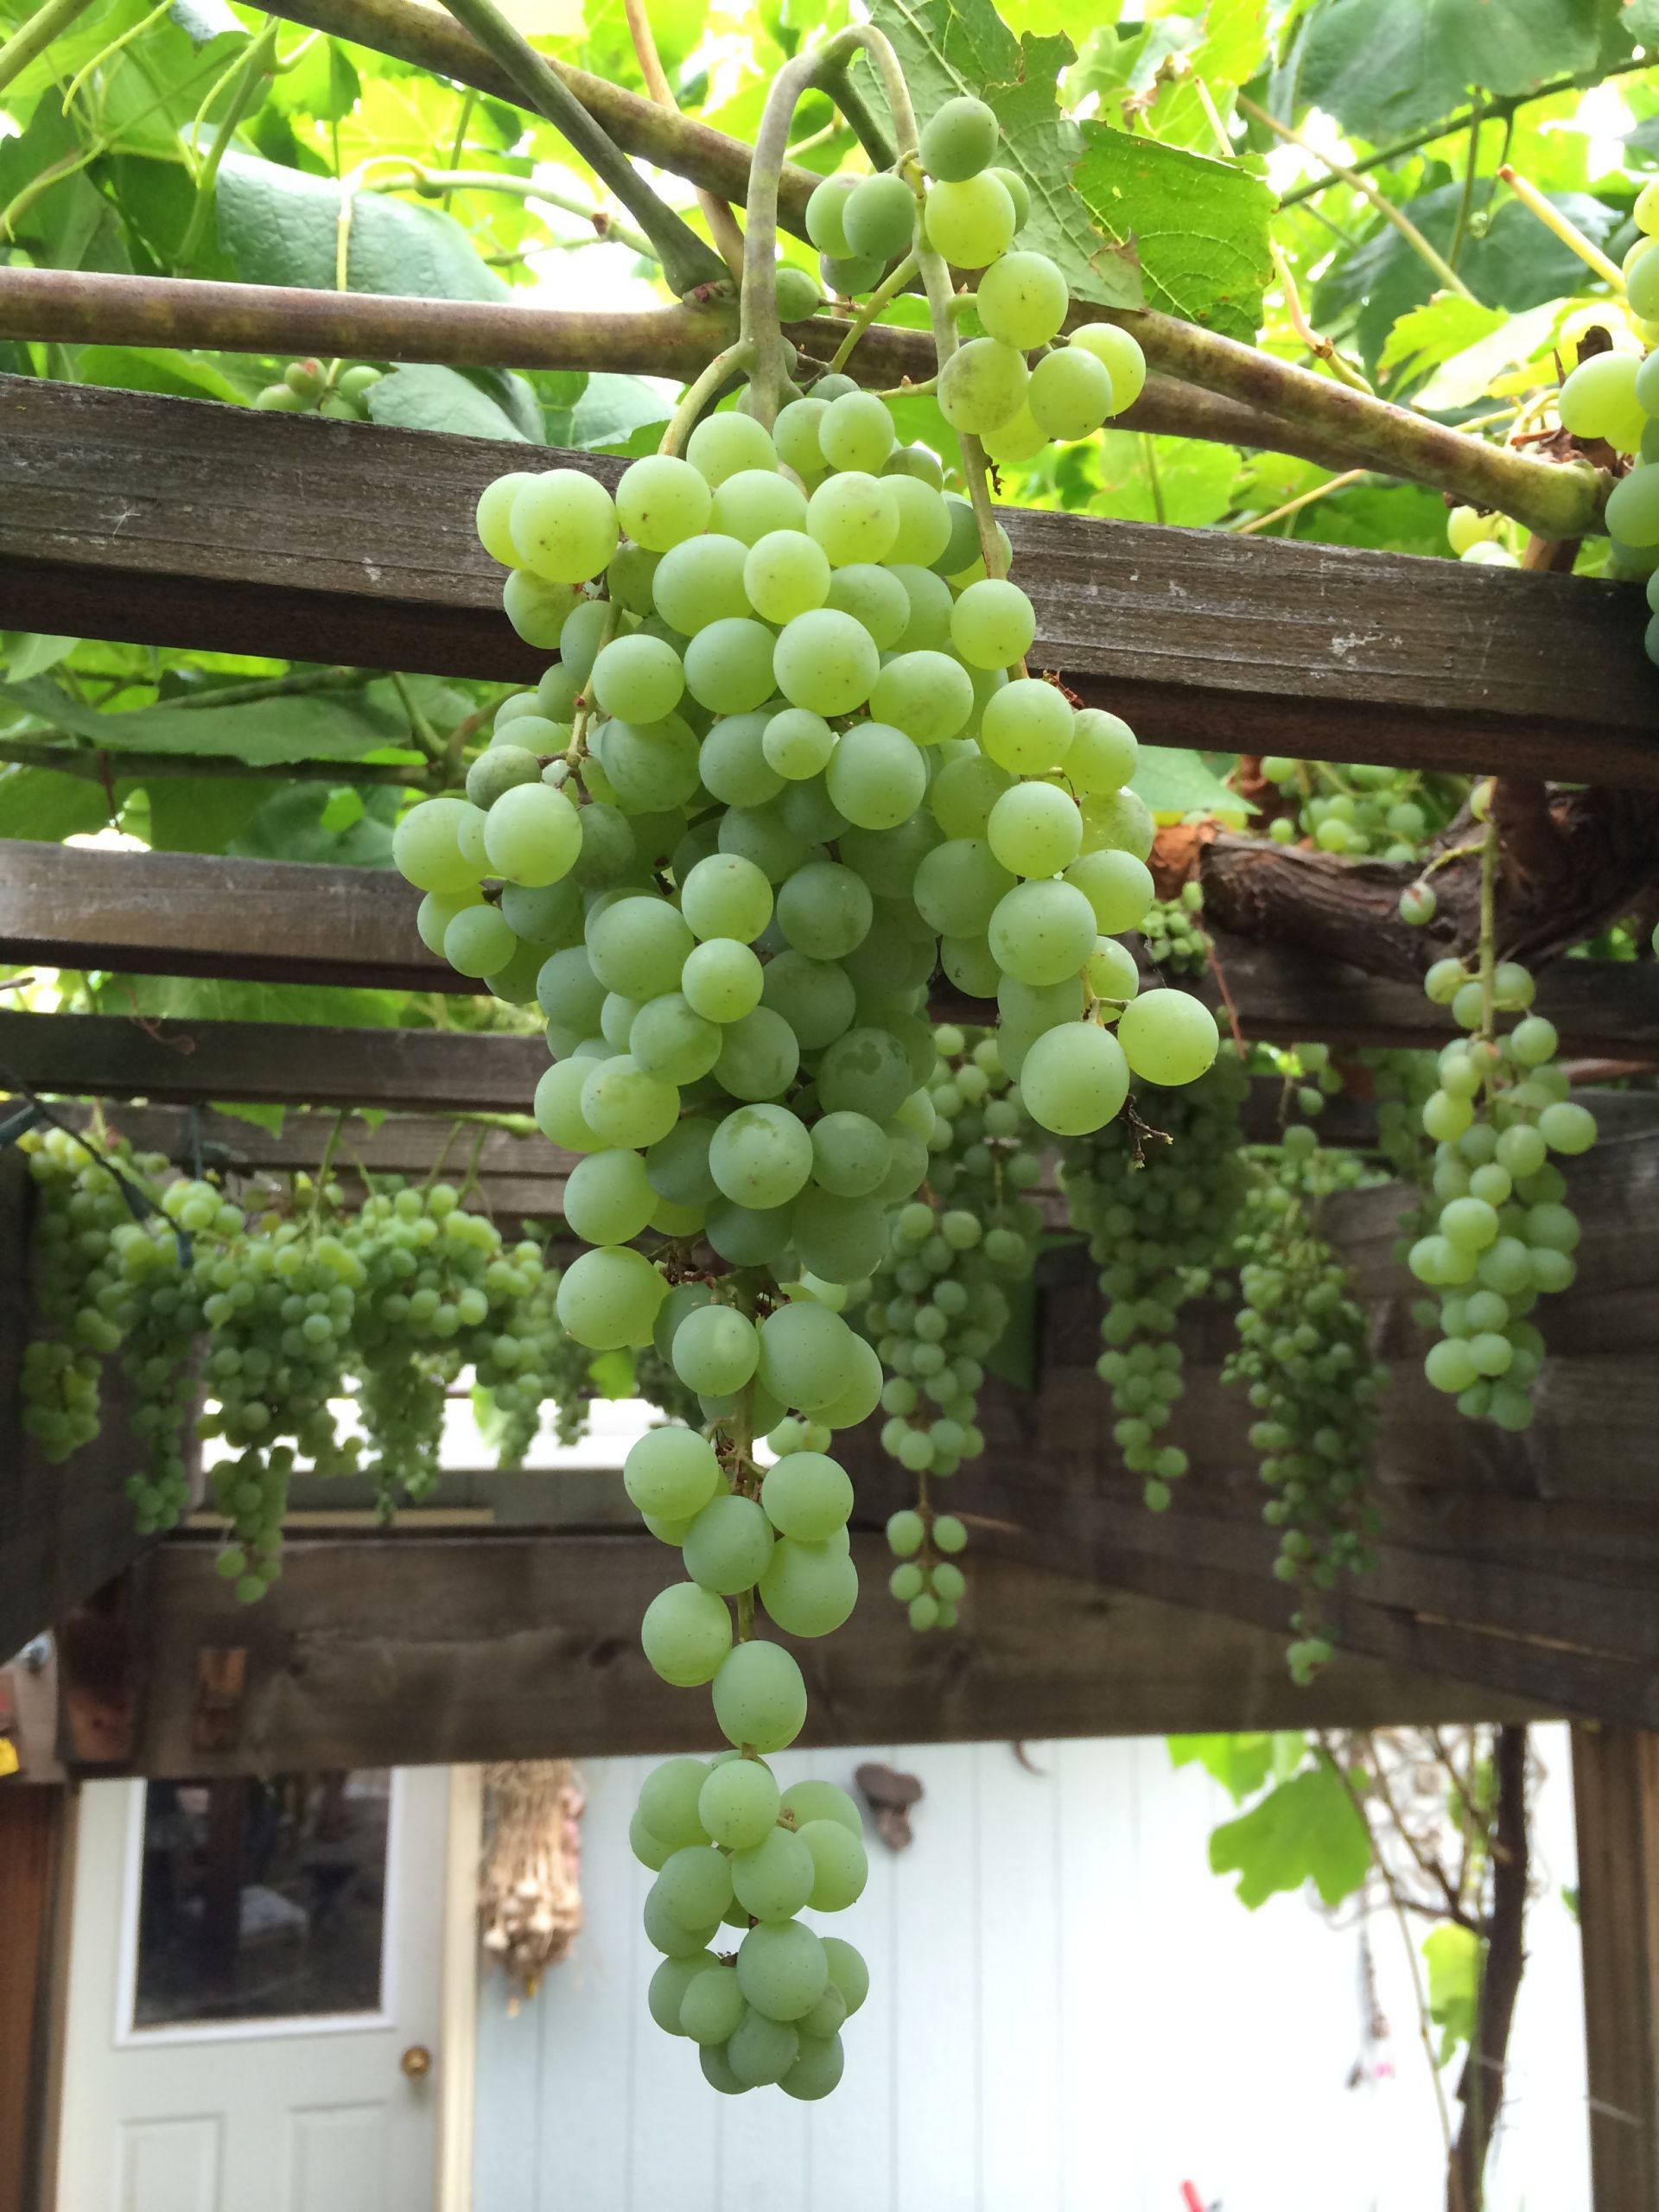 Growing Grapes In Backyard
 Tips for Growing and Pruning Table Grapes in the Home